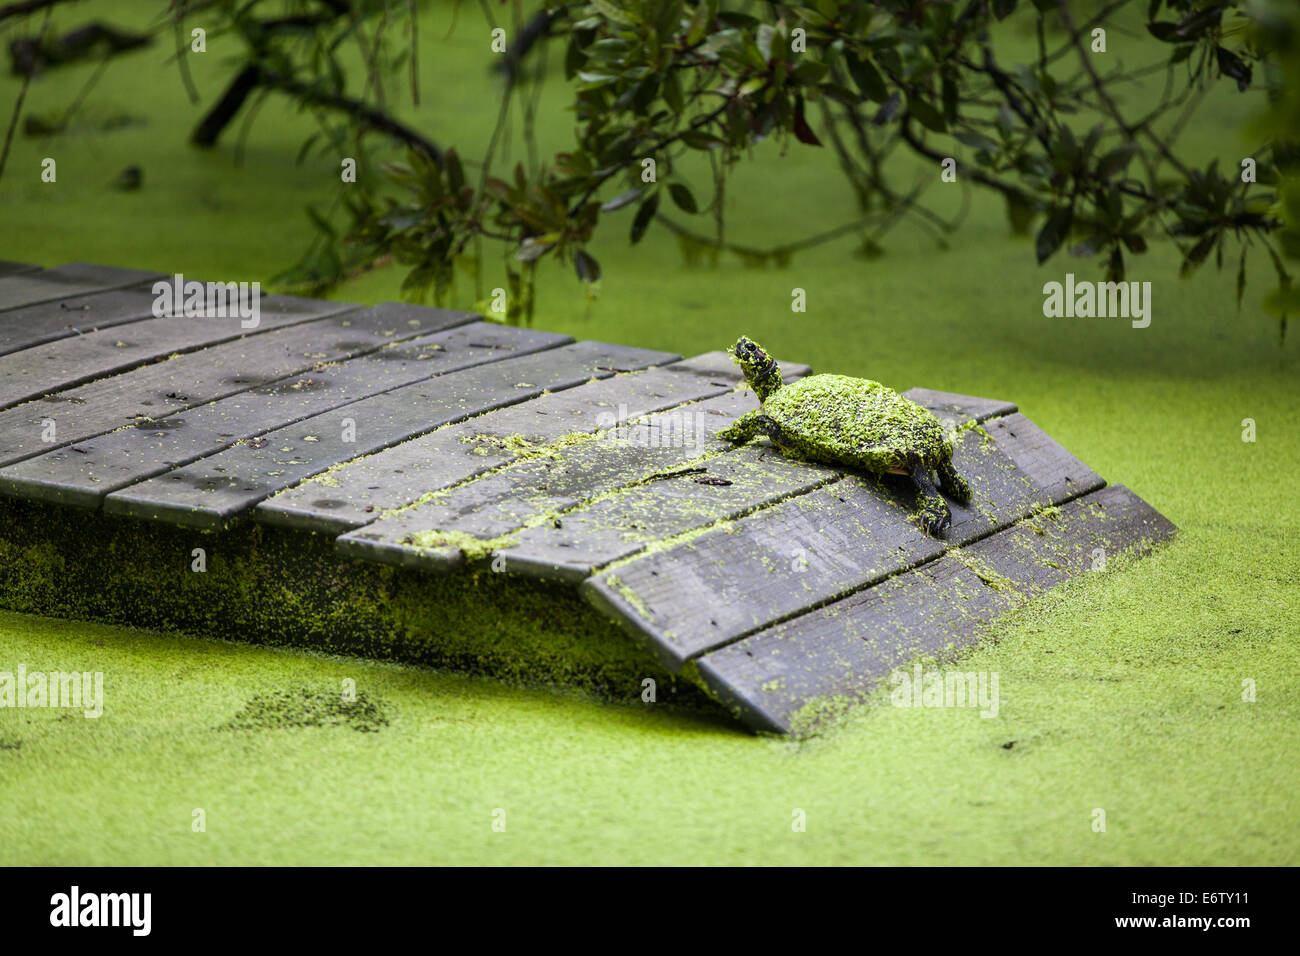 Florida Red Bellied Turtles Covered in Duck Weed Stock Photo